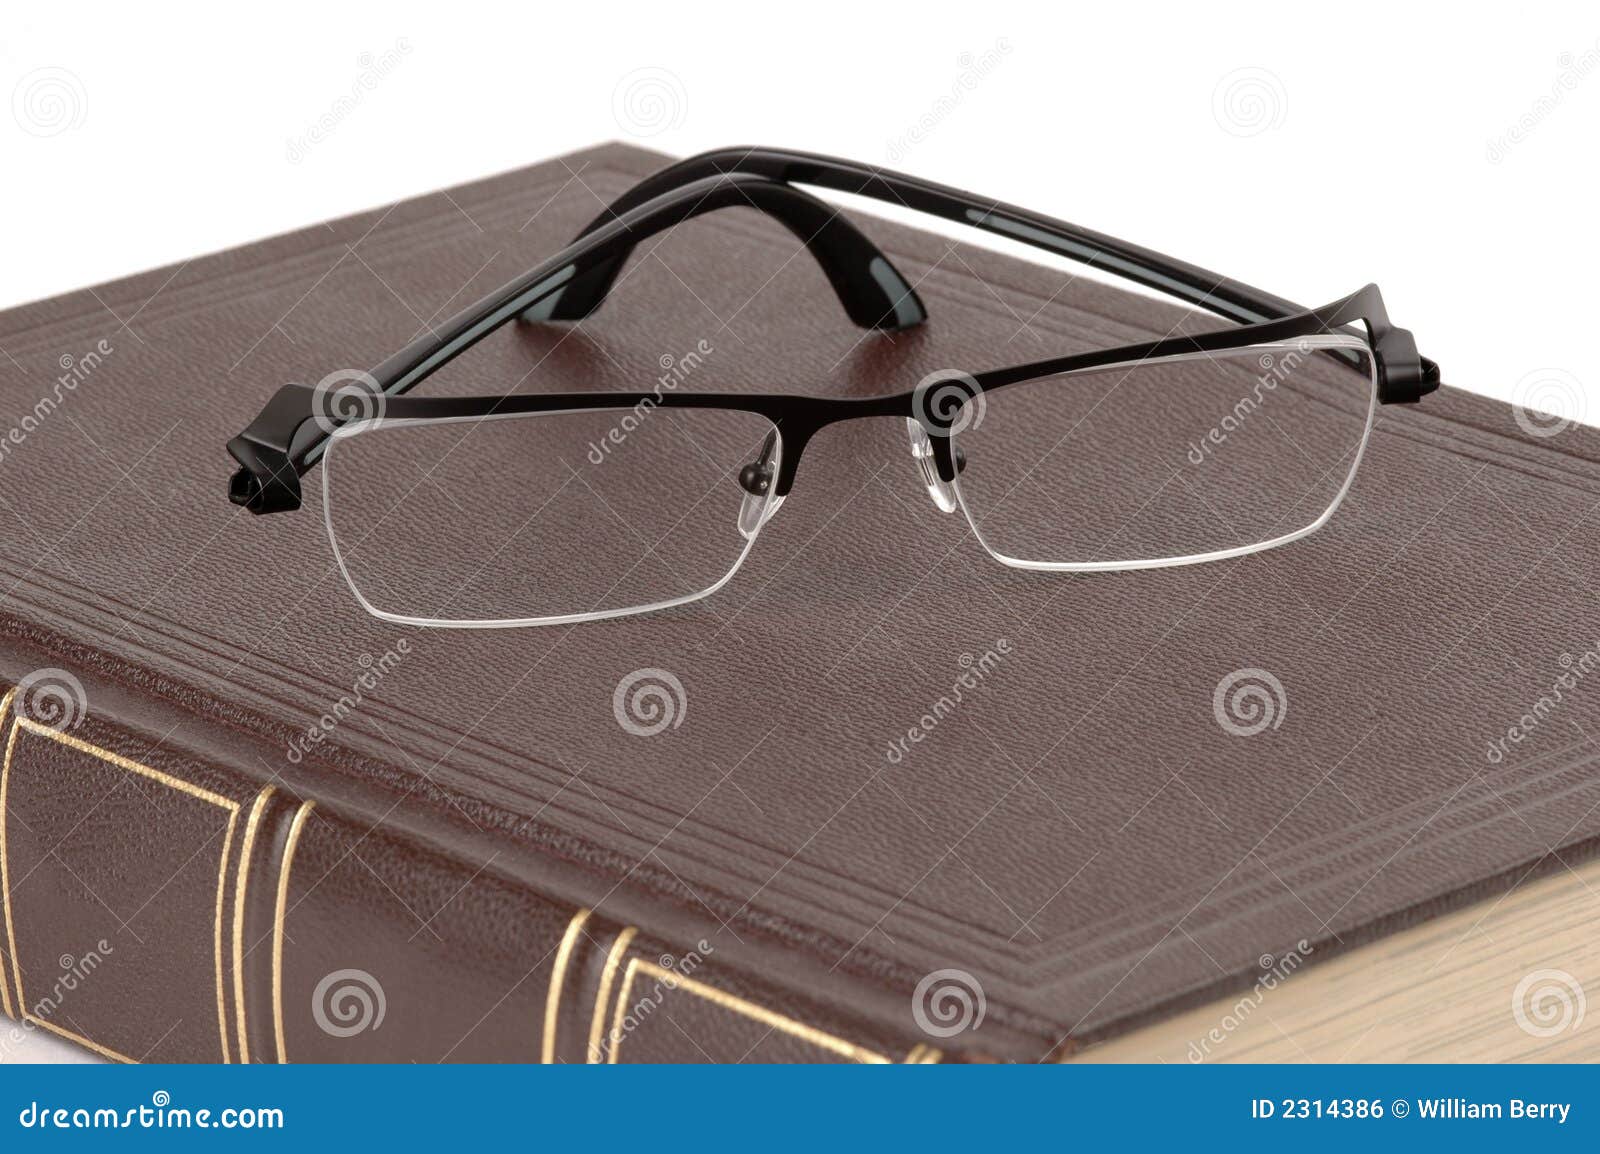 Book And Glasses Picture Image 2314386 